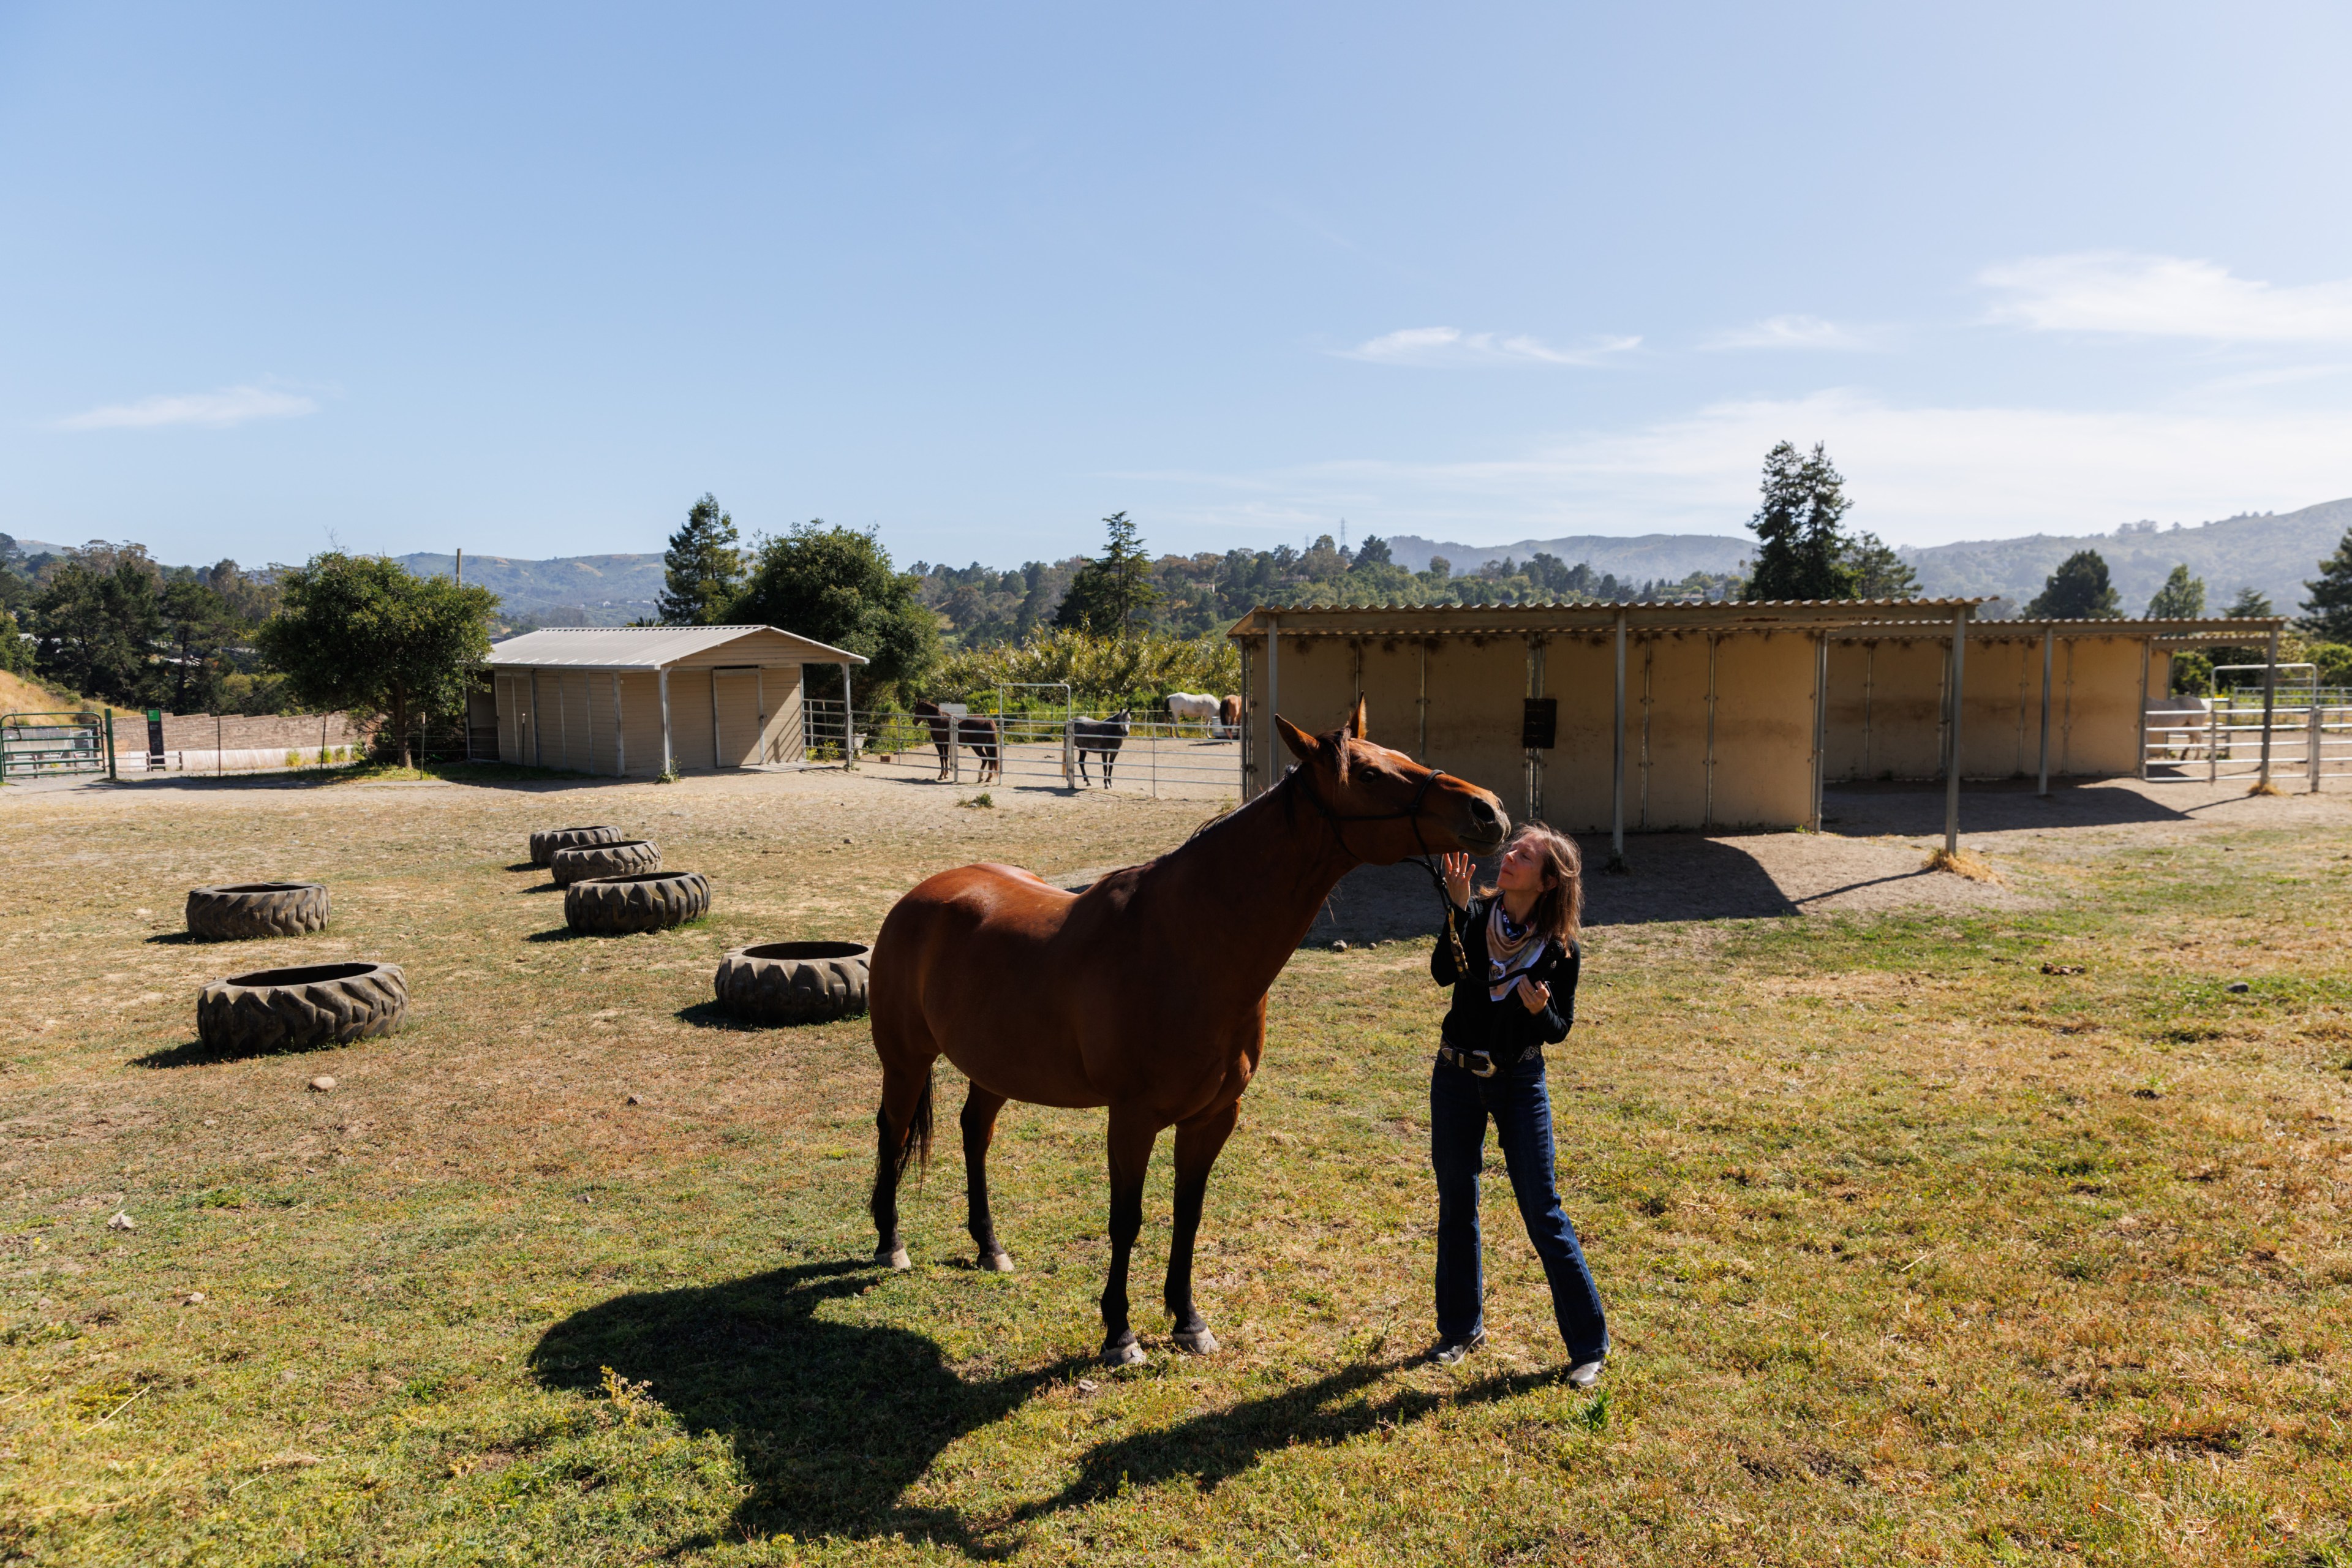 A person pets a horse in a sunny field dotted with large tires, near wooden sheds and other horses, with hills and trees in the background.